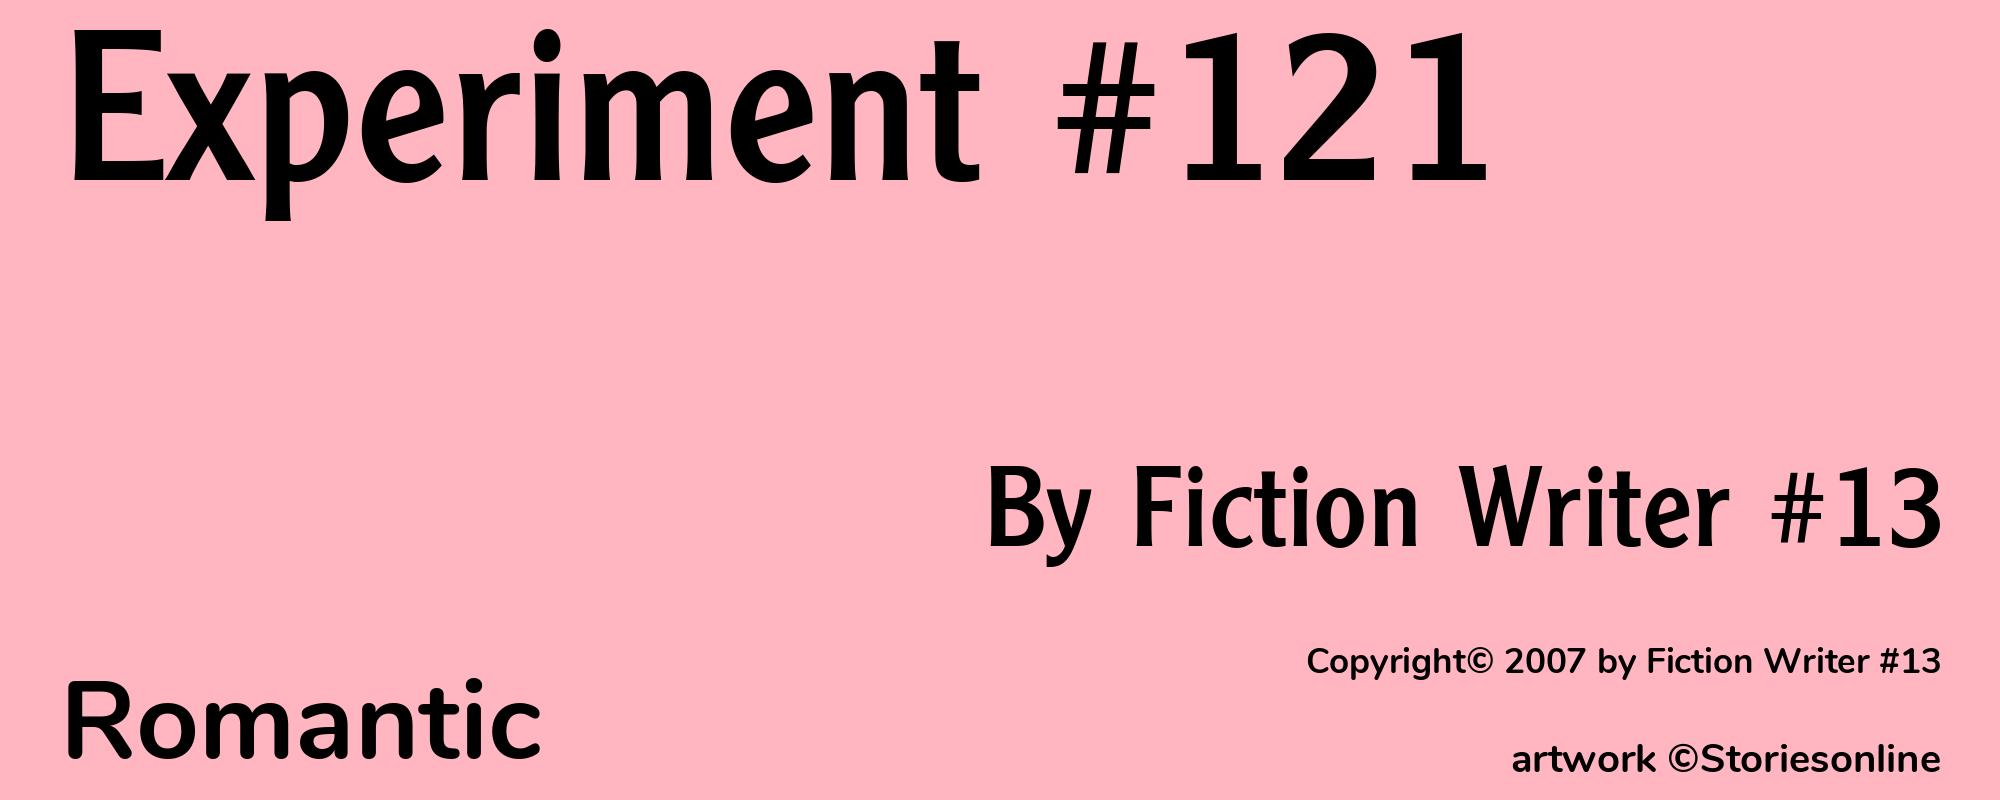 Experiment #121 - Cover